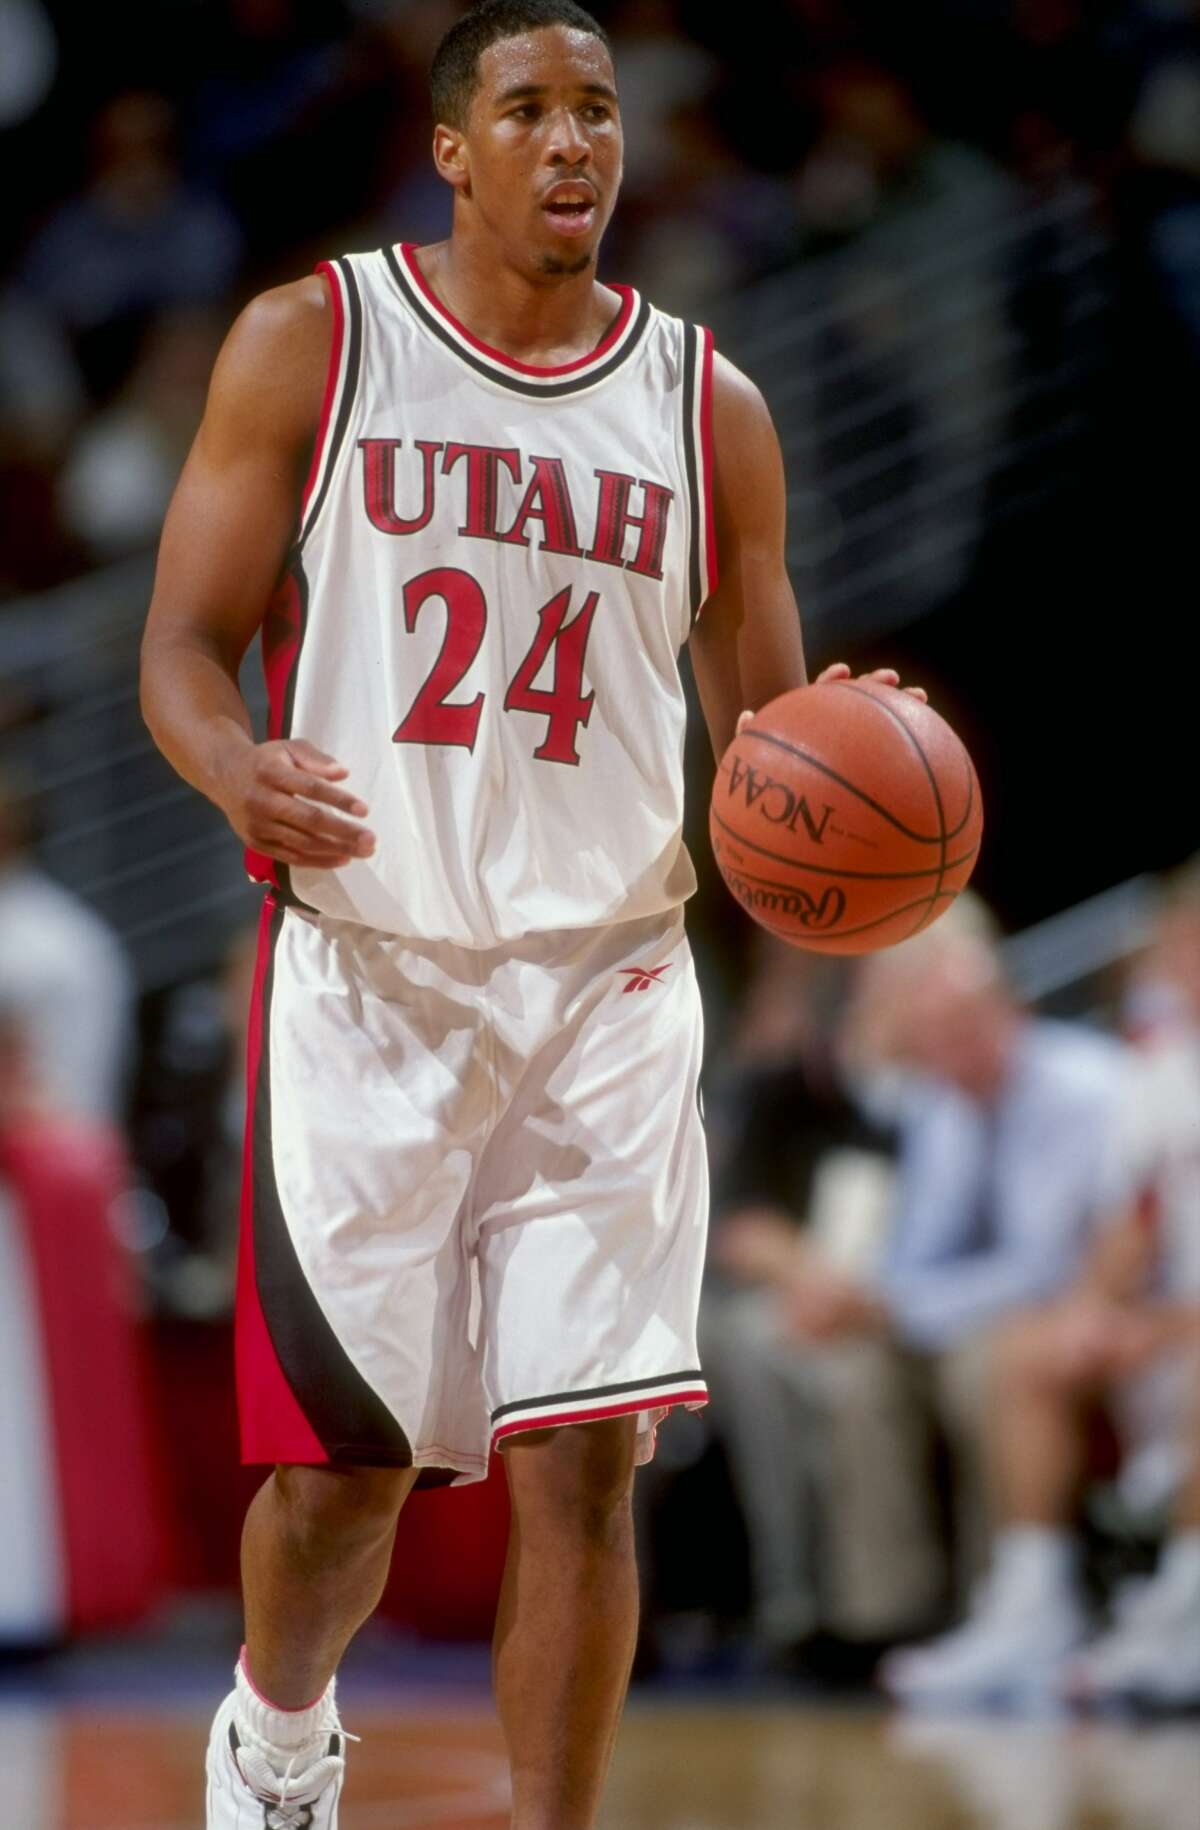 Eighteen years ago, Spurs' Andre Miller played on NCAA's biggest